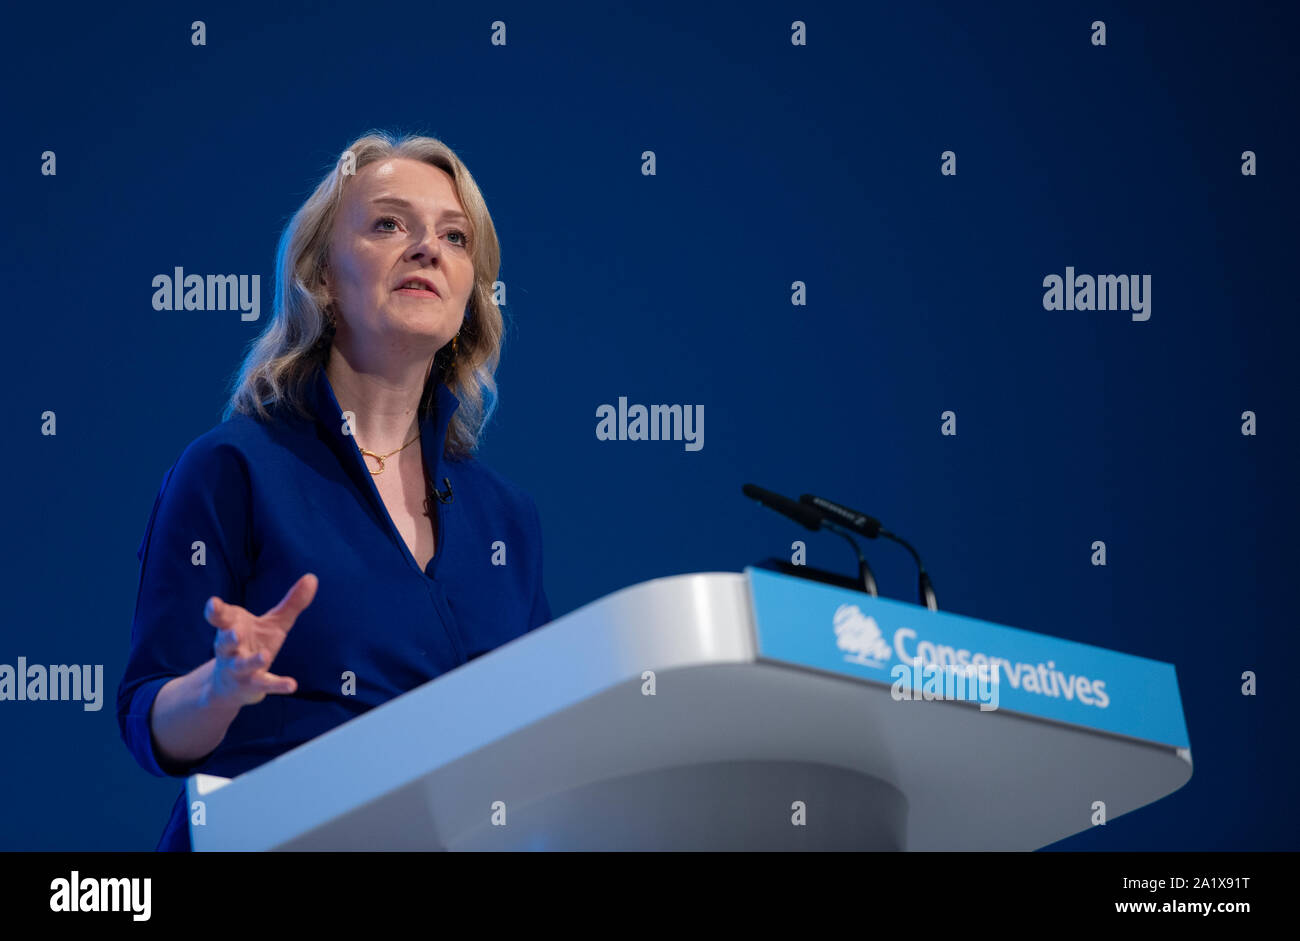 Manchester, UK. 29th September 2019. Liz Truss, Secretary of State for International Trade and President of the Board of Trade, Minister for Women and Equalities and MP for South West Norfolk speaks at day one of the Conservative Party Conference in Manchester. © Russell Hart/Alamy Live News. Stock Photo